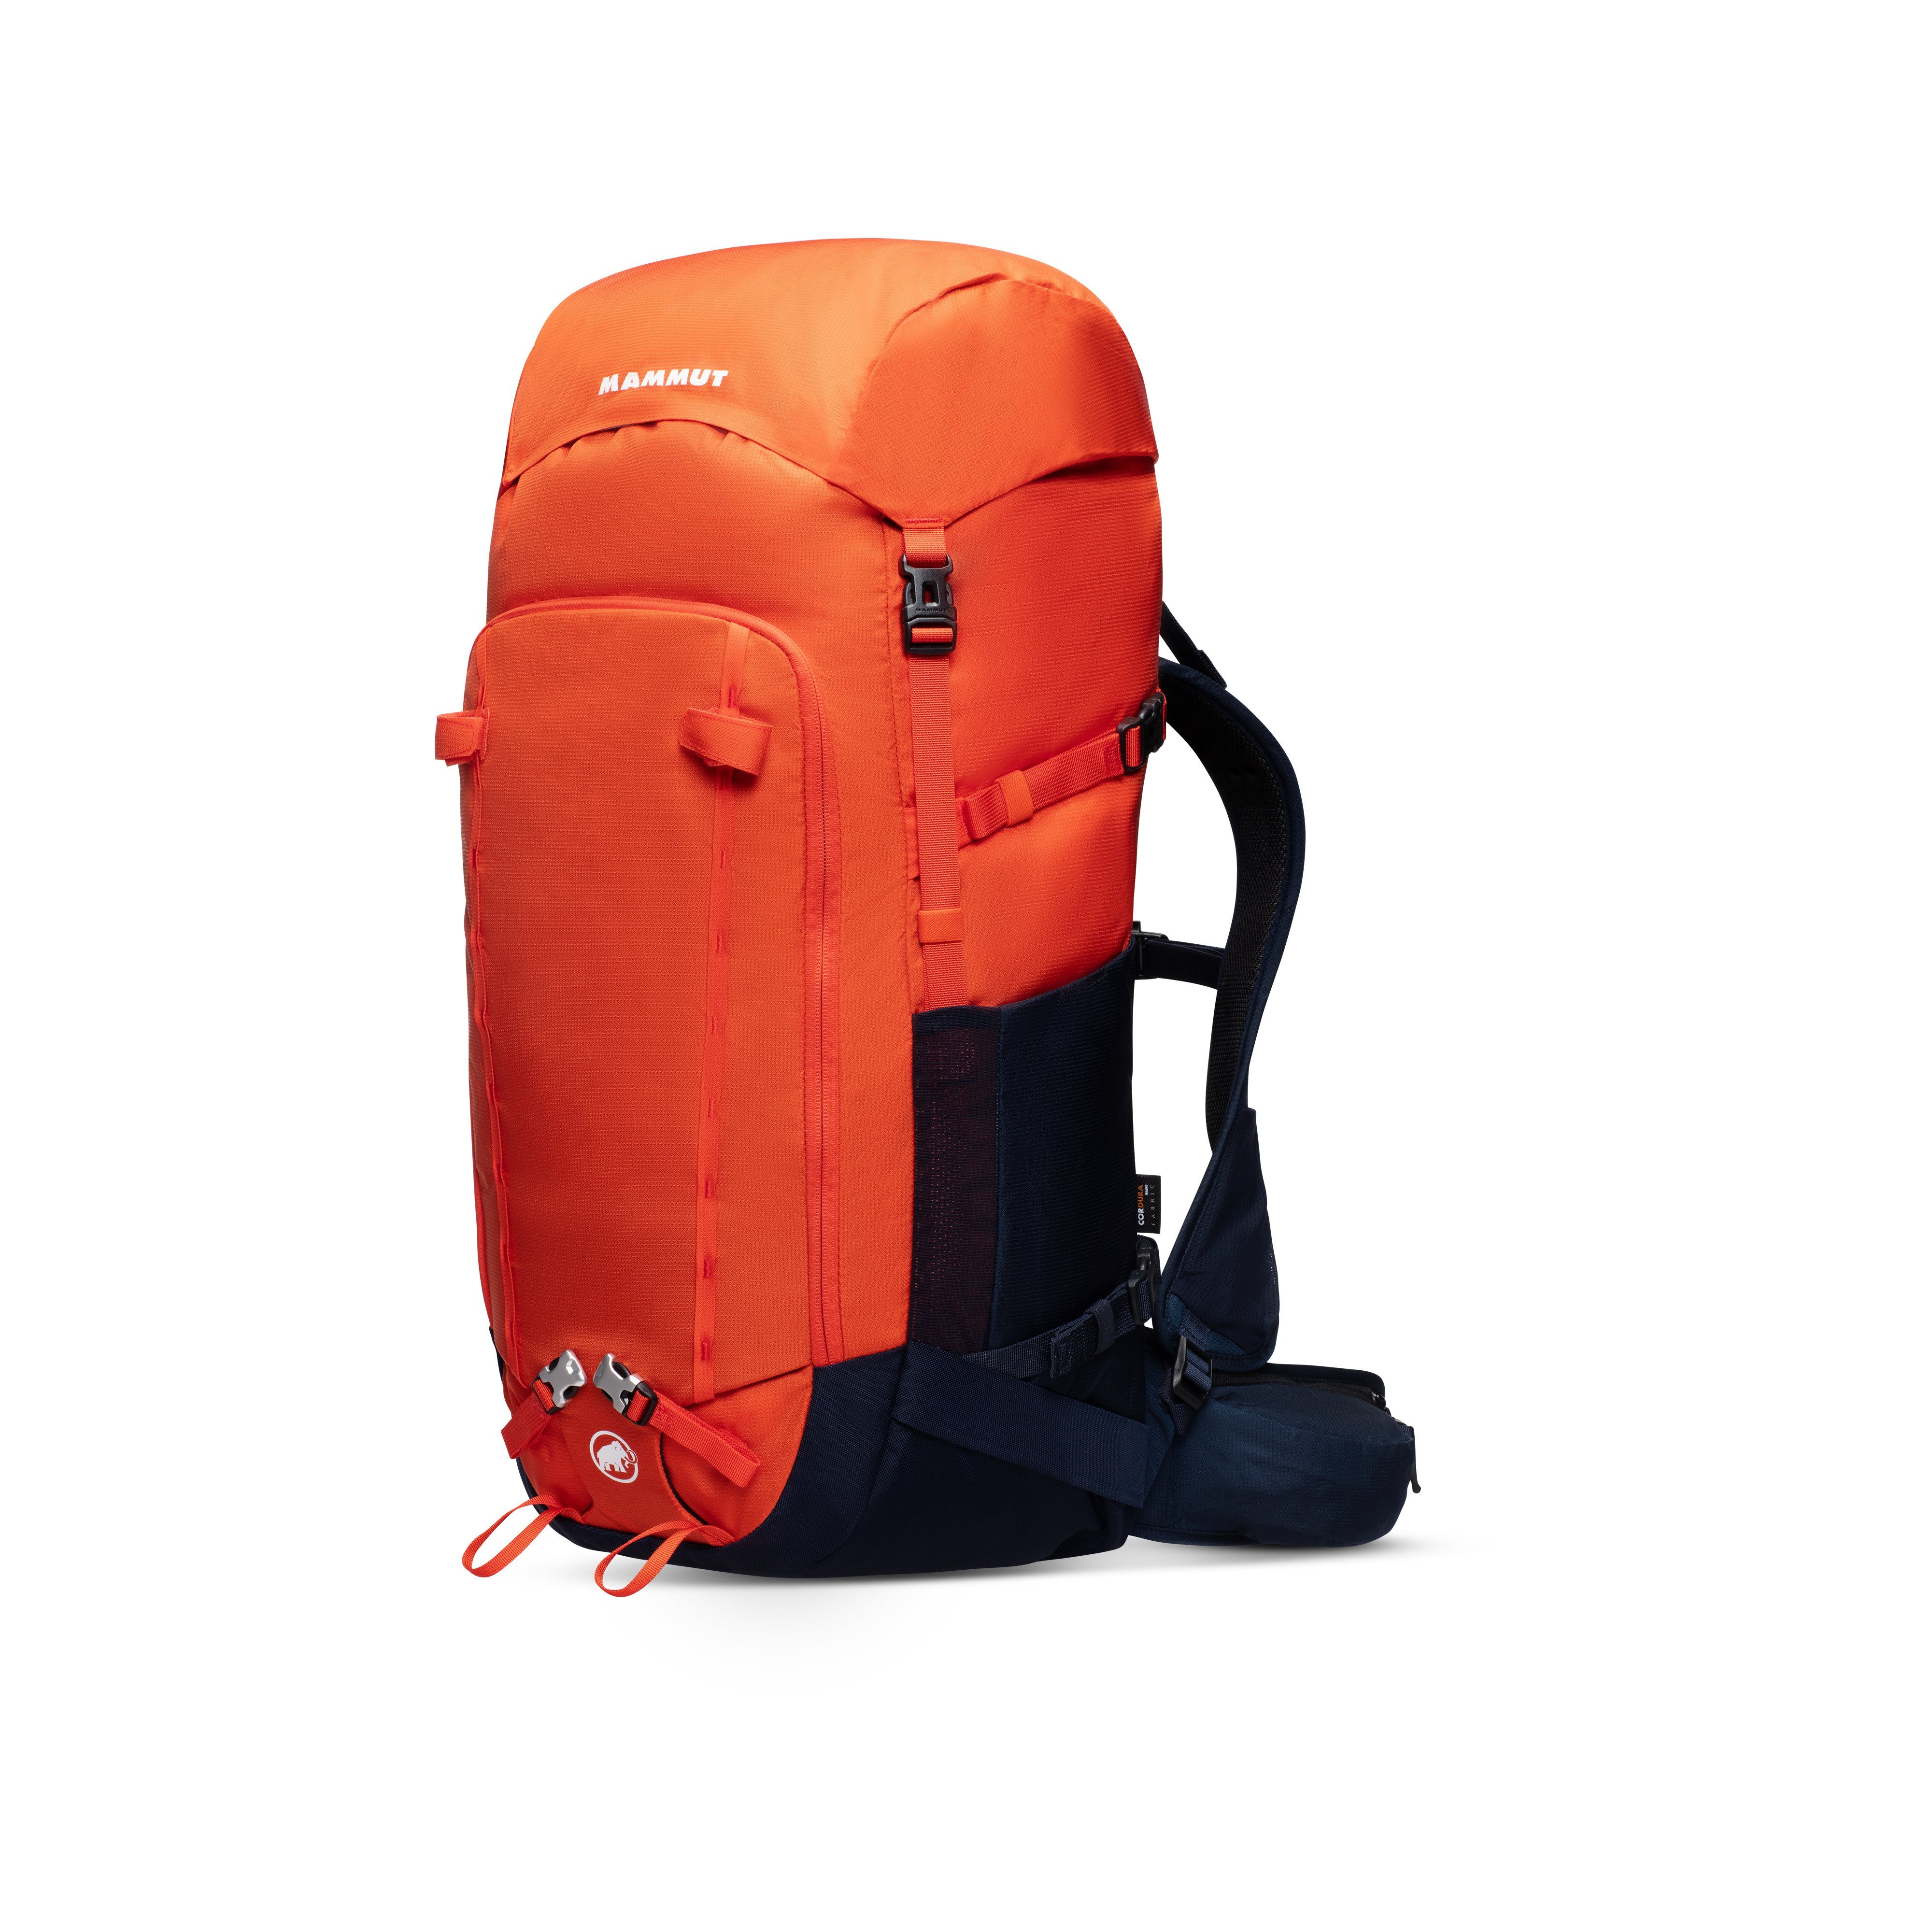 Trion 50 - hot red-marine, 50 L product image